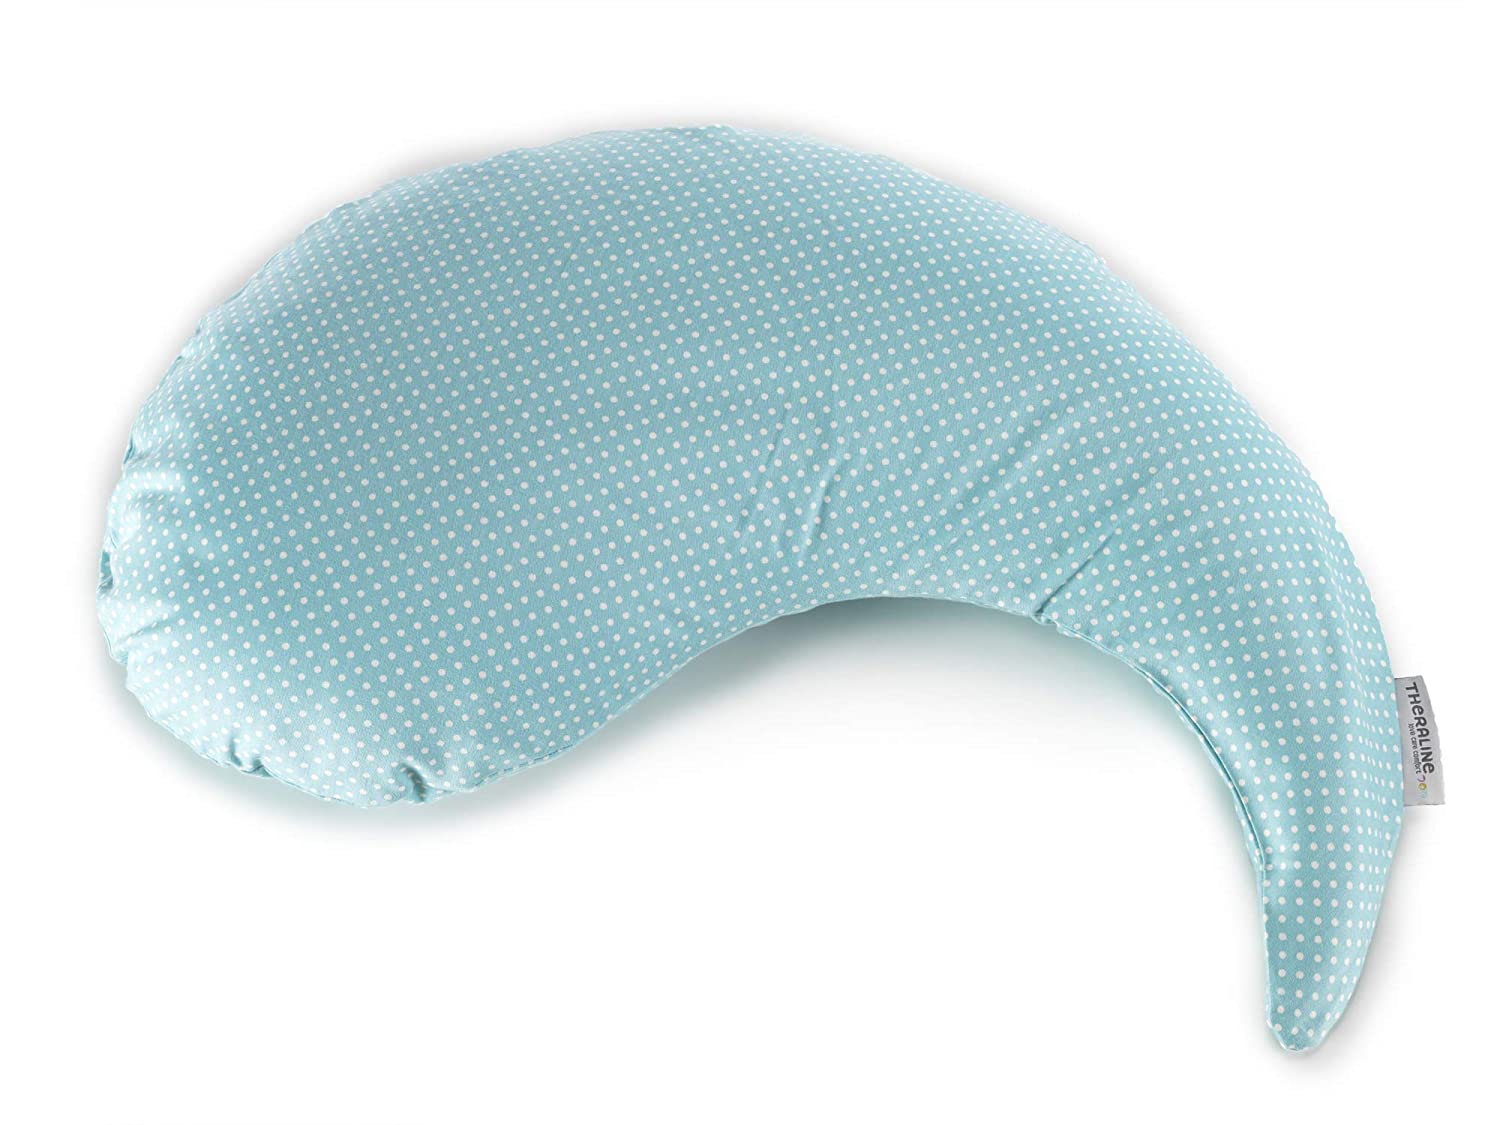 The Theraline Yinnie nursing pillow, filled with sand-like original micro-beads, including outer cover.